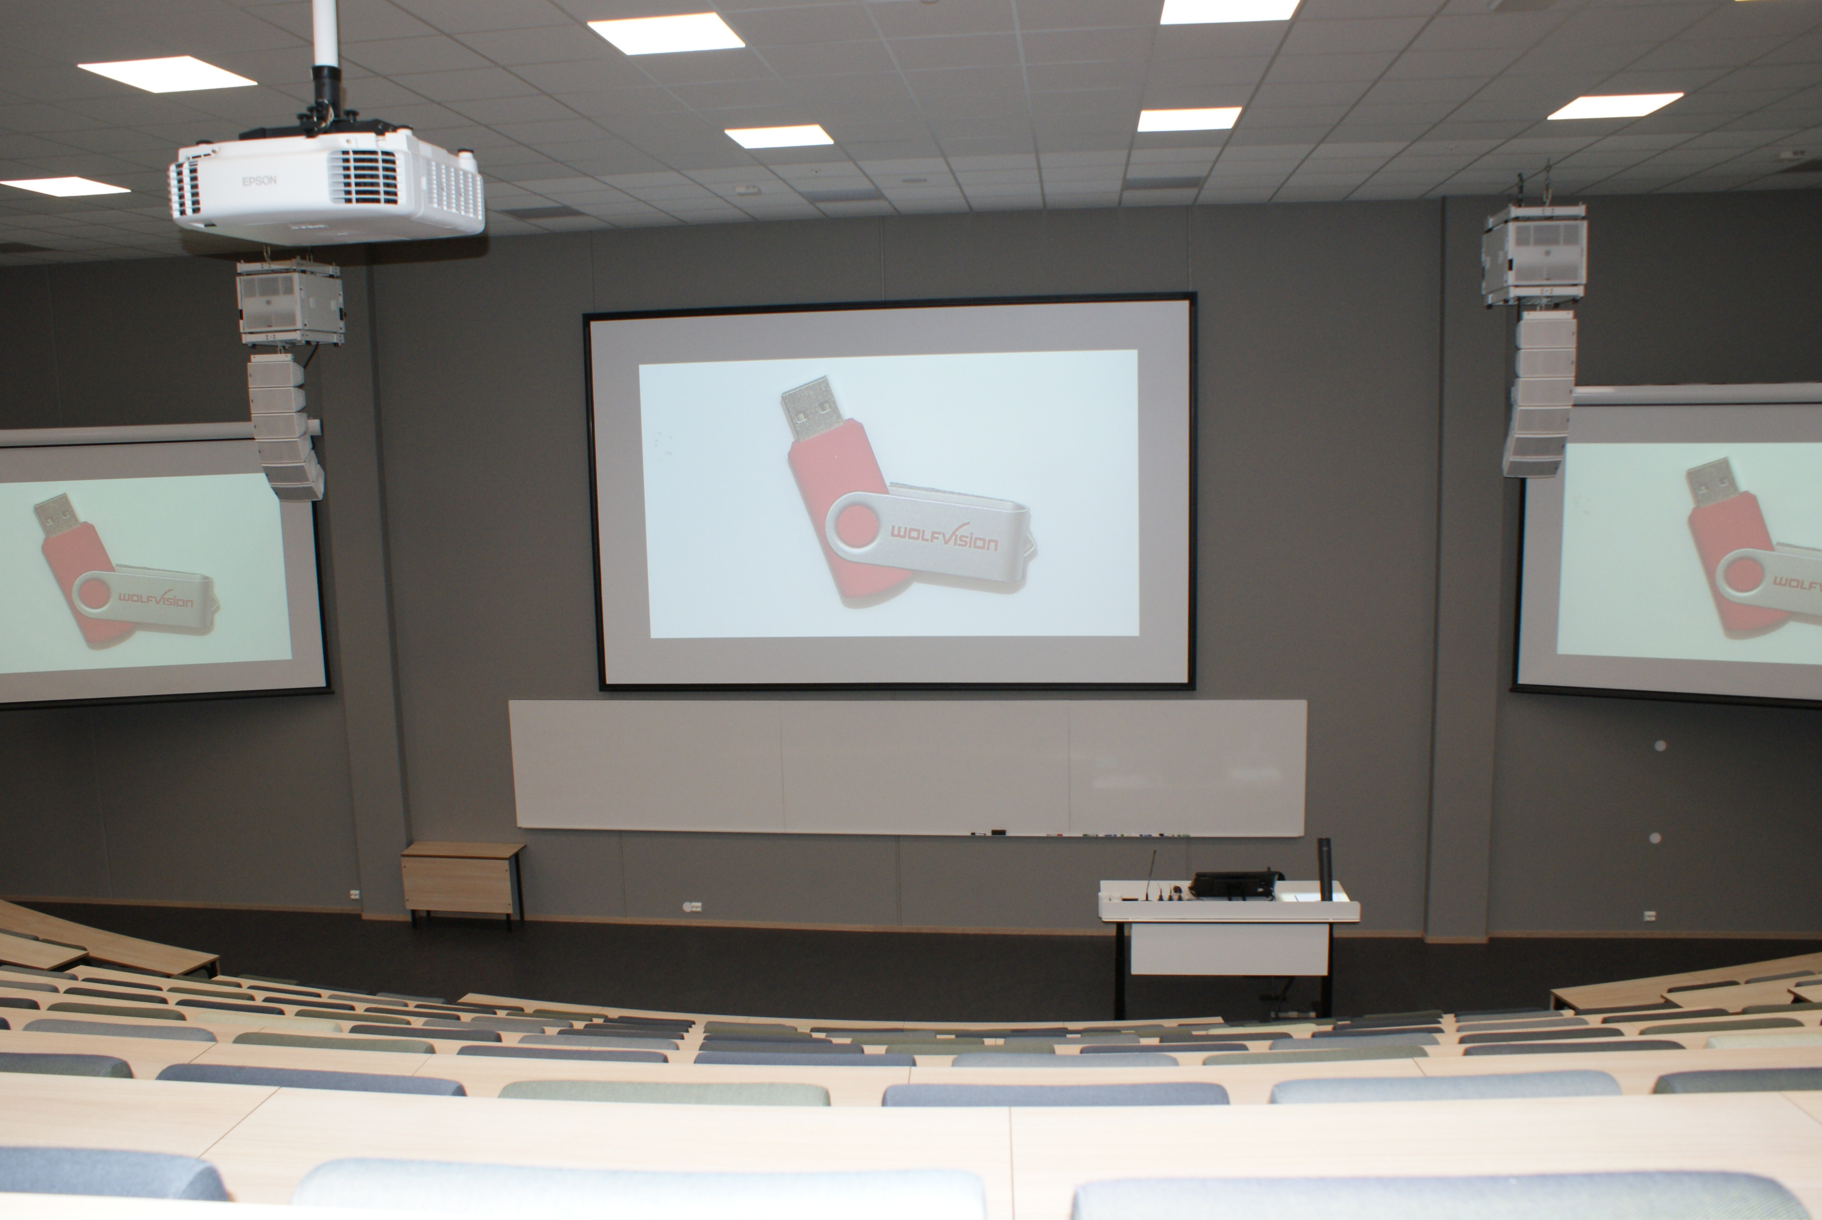 WolfVision VZ-3neo Visualizer installed in an auditorium at BI Norwegian Business school..